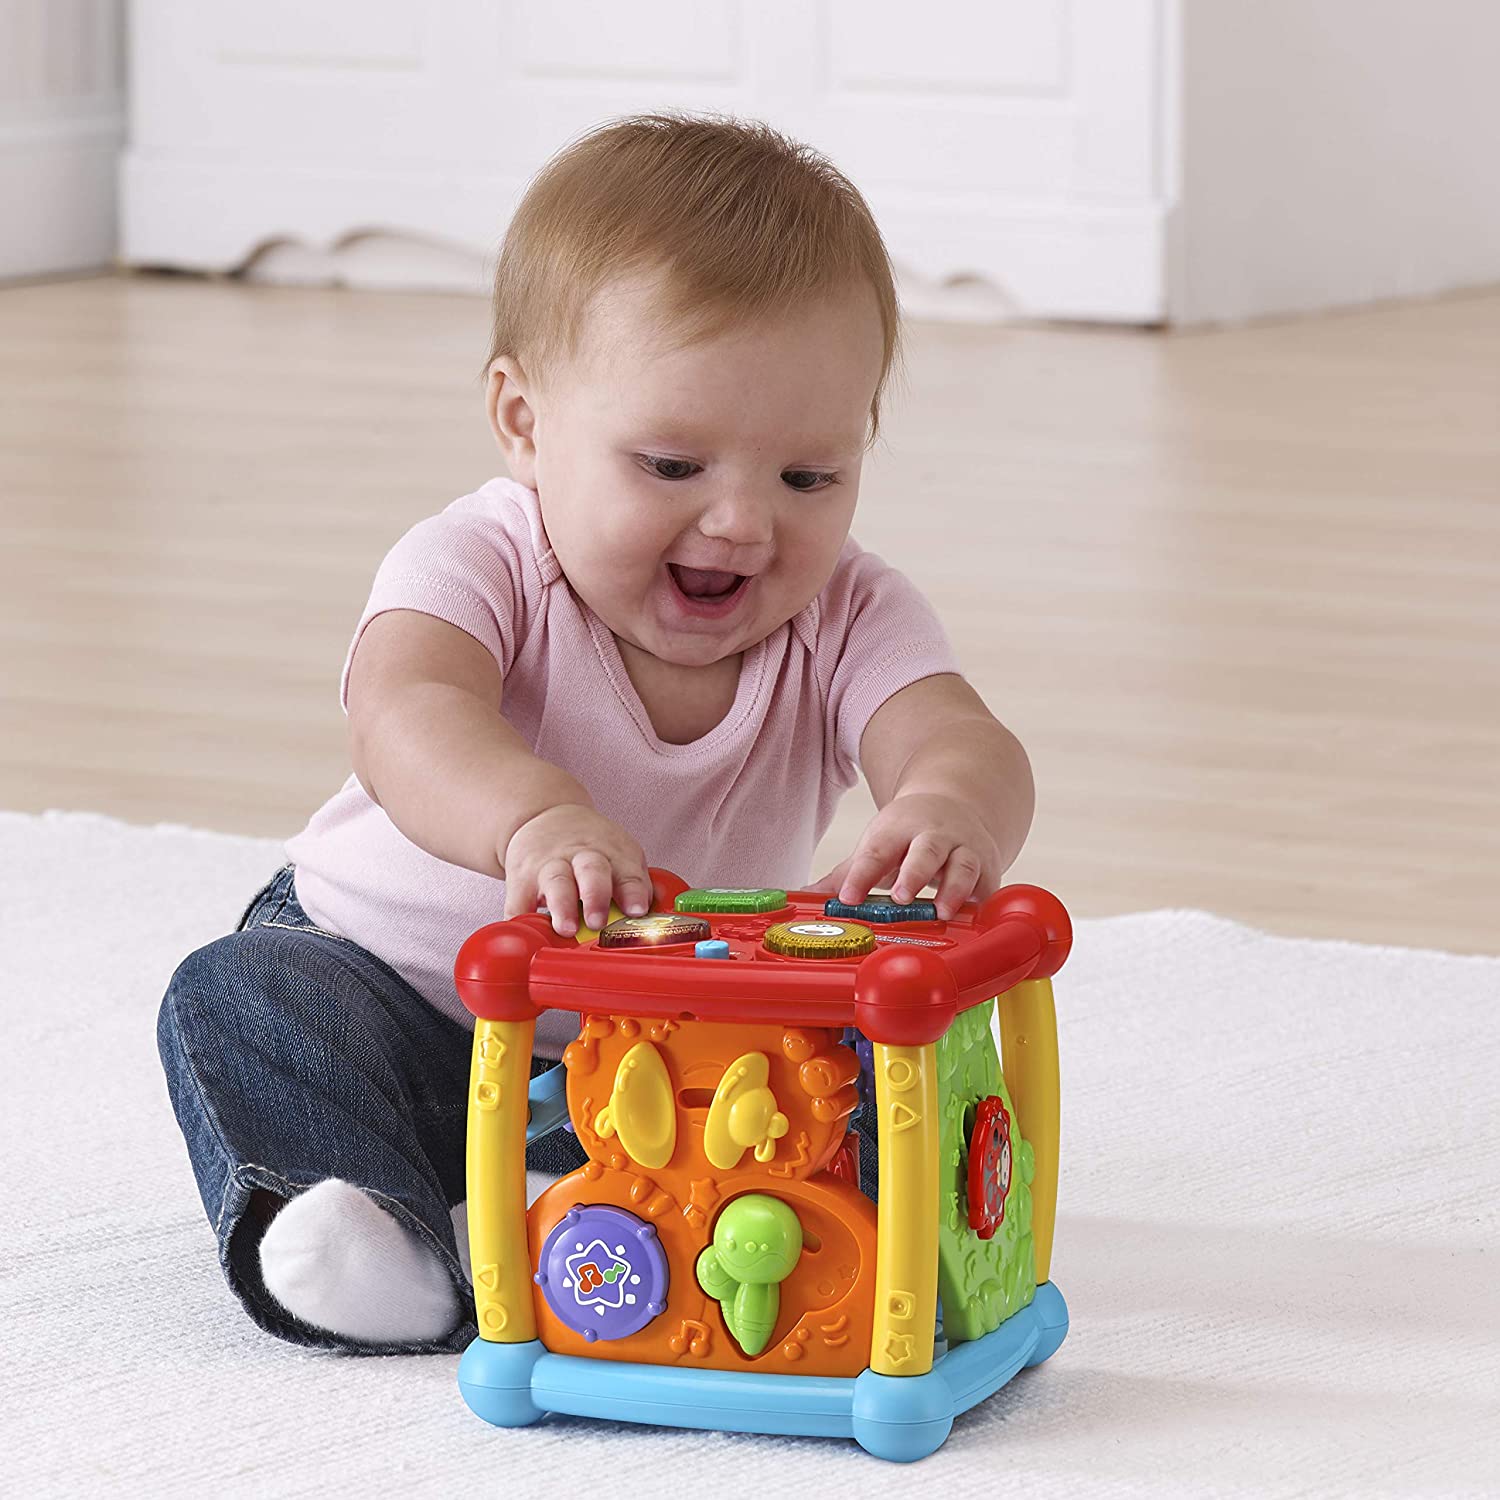 VTech Busy Learners Activity Cube, Red - with 5 sides of play encourage discovery and exploration